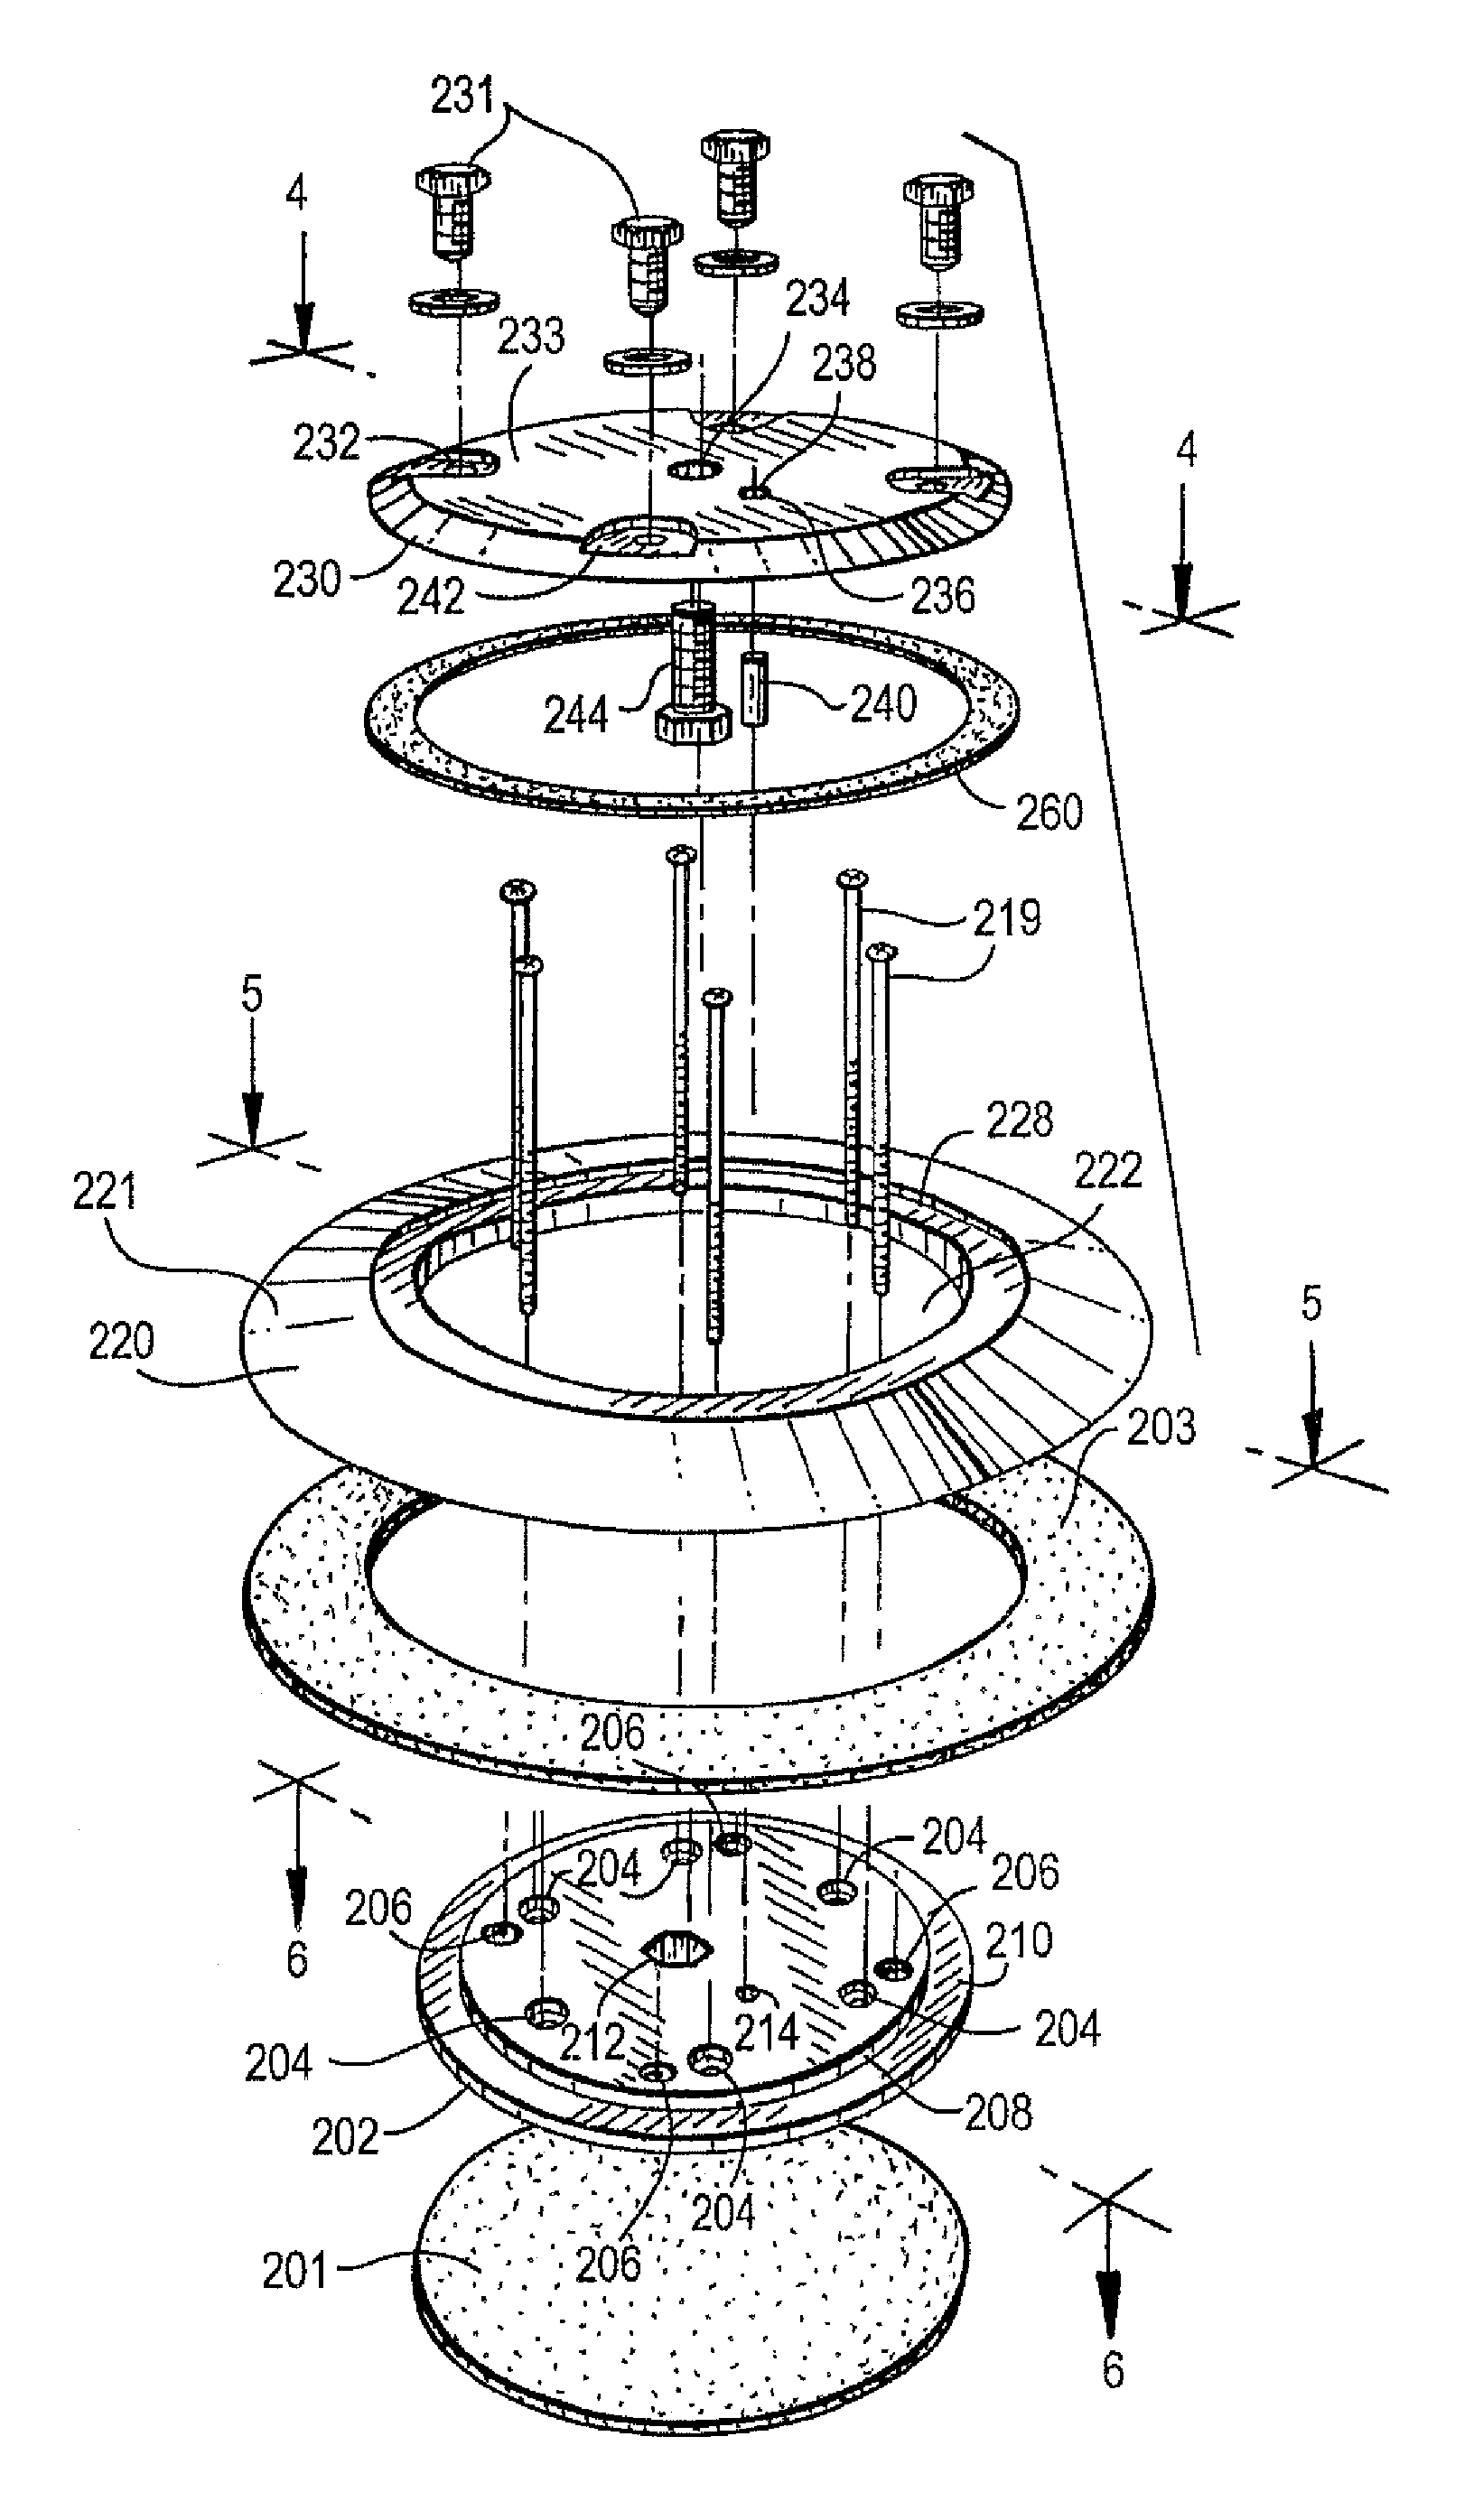 Non-invasive roof mounting adaptor and method for installing same